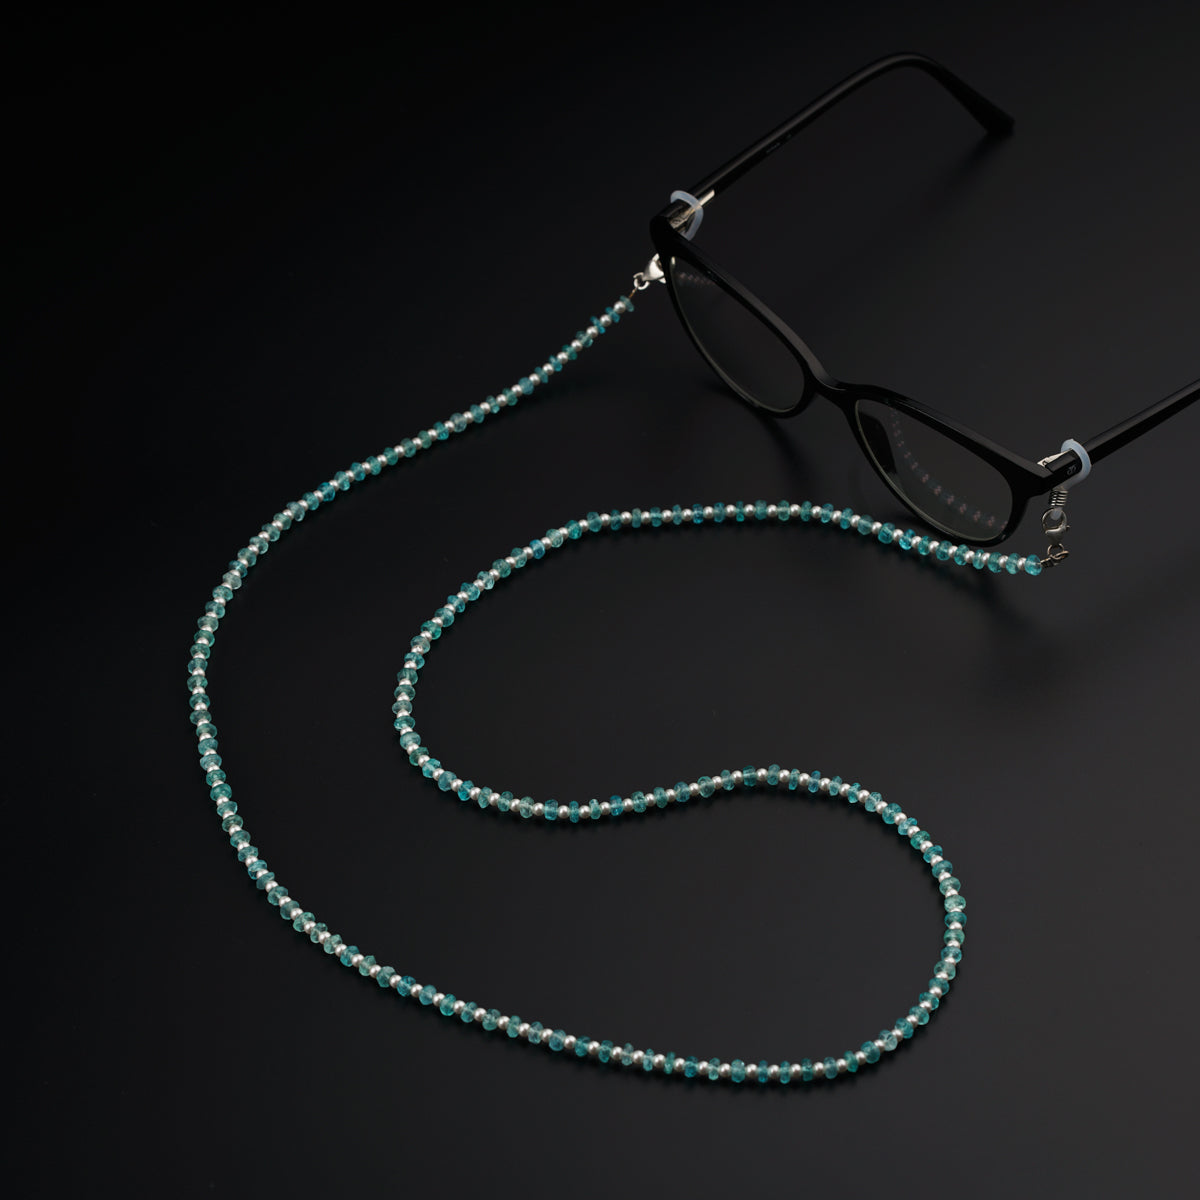 a pair of glasses and a beaded necklace